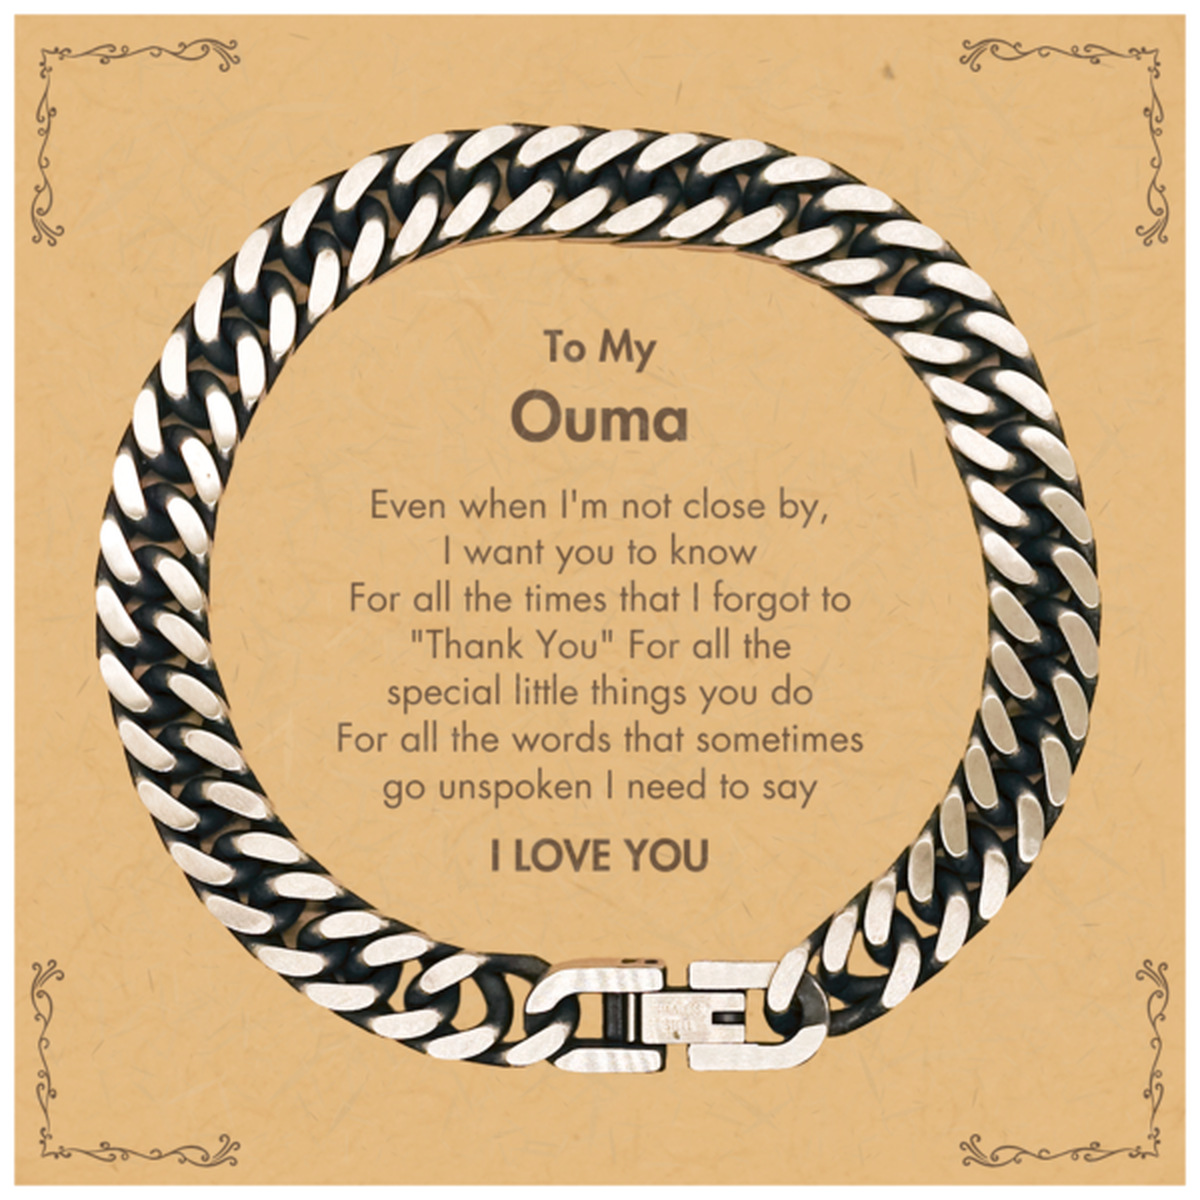 Thank You Gifts for Ouma, Keepsake Cuban Link Chain Bracelet Gifts for Ouma Birthday Mother's day Father's Day Ouma For all the words That sometimes go unspoken I need to say I LOVE YOU